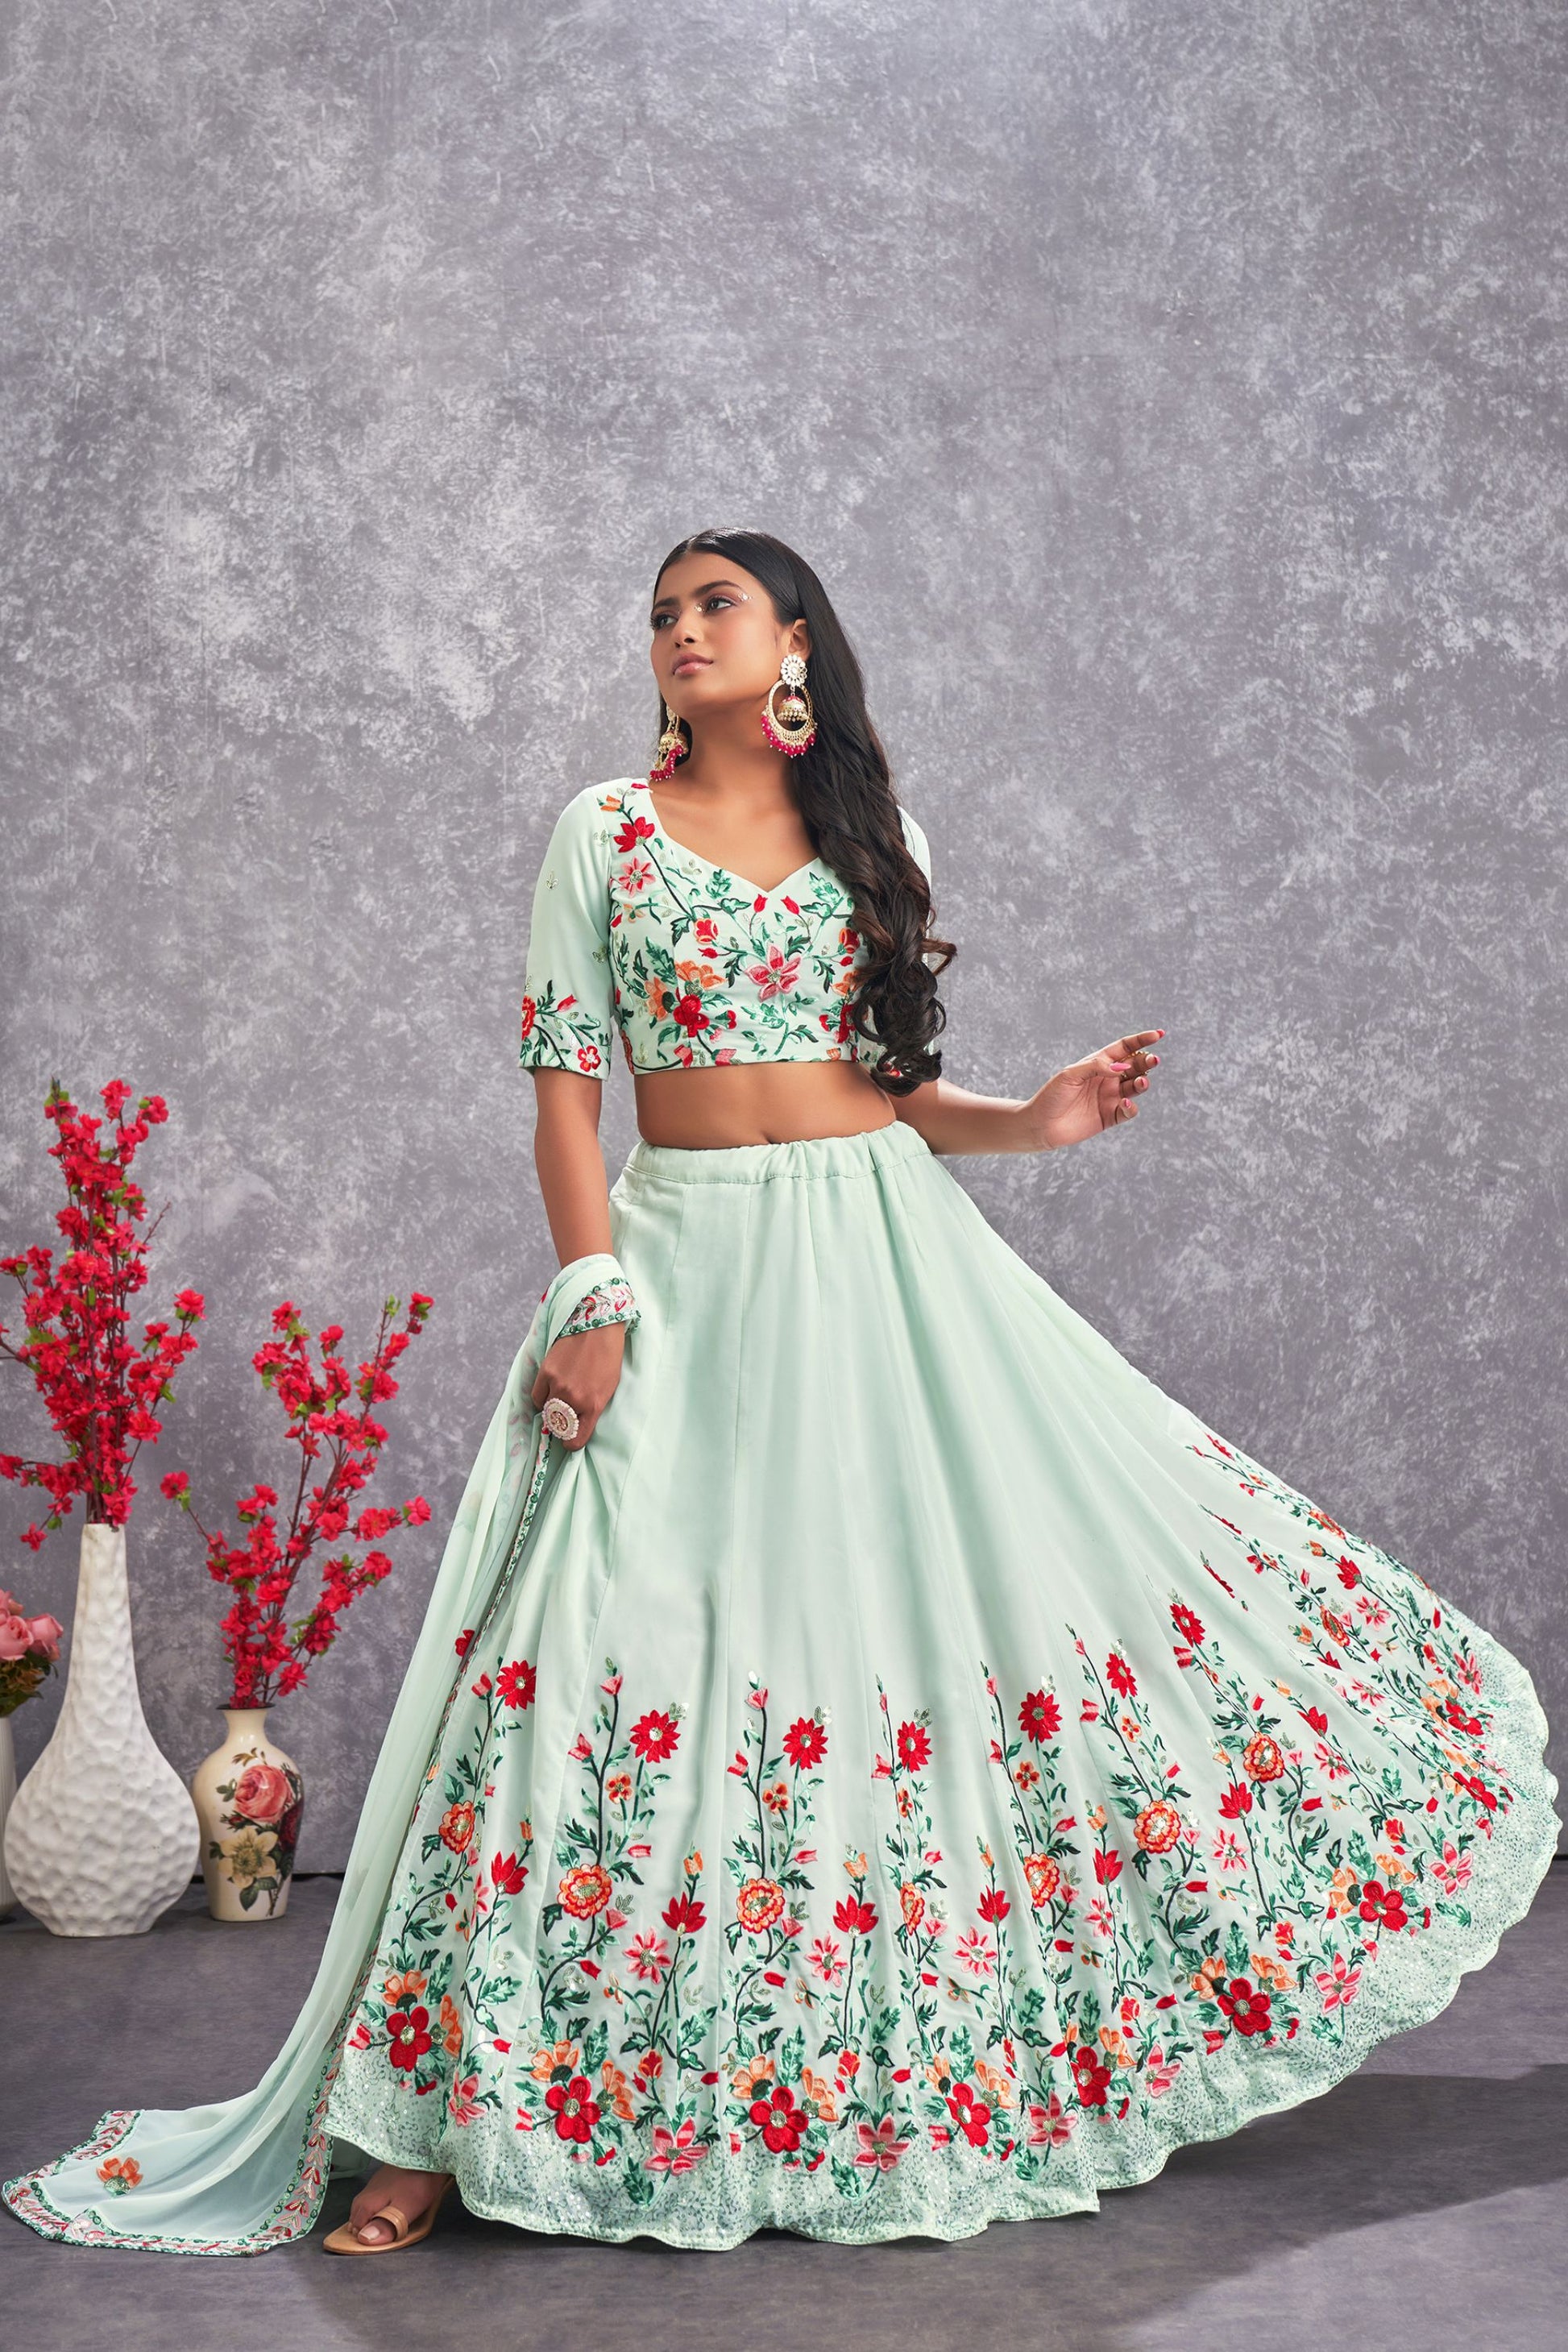 Green Georgette Floral Embroidery Lehenga Choli For Indian Festivals & Weddings - Sequence Embroidery Work, Thread Embroidery Work, Mirror Work